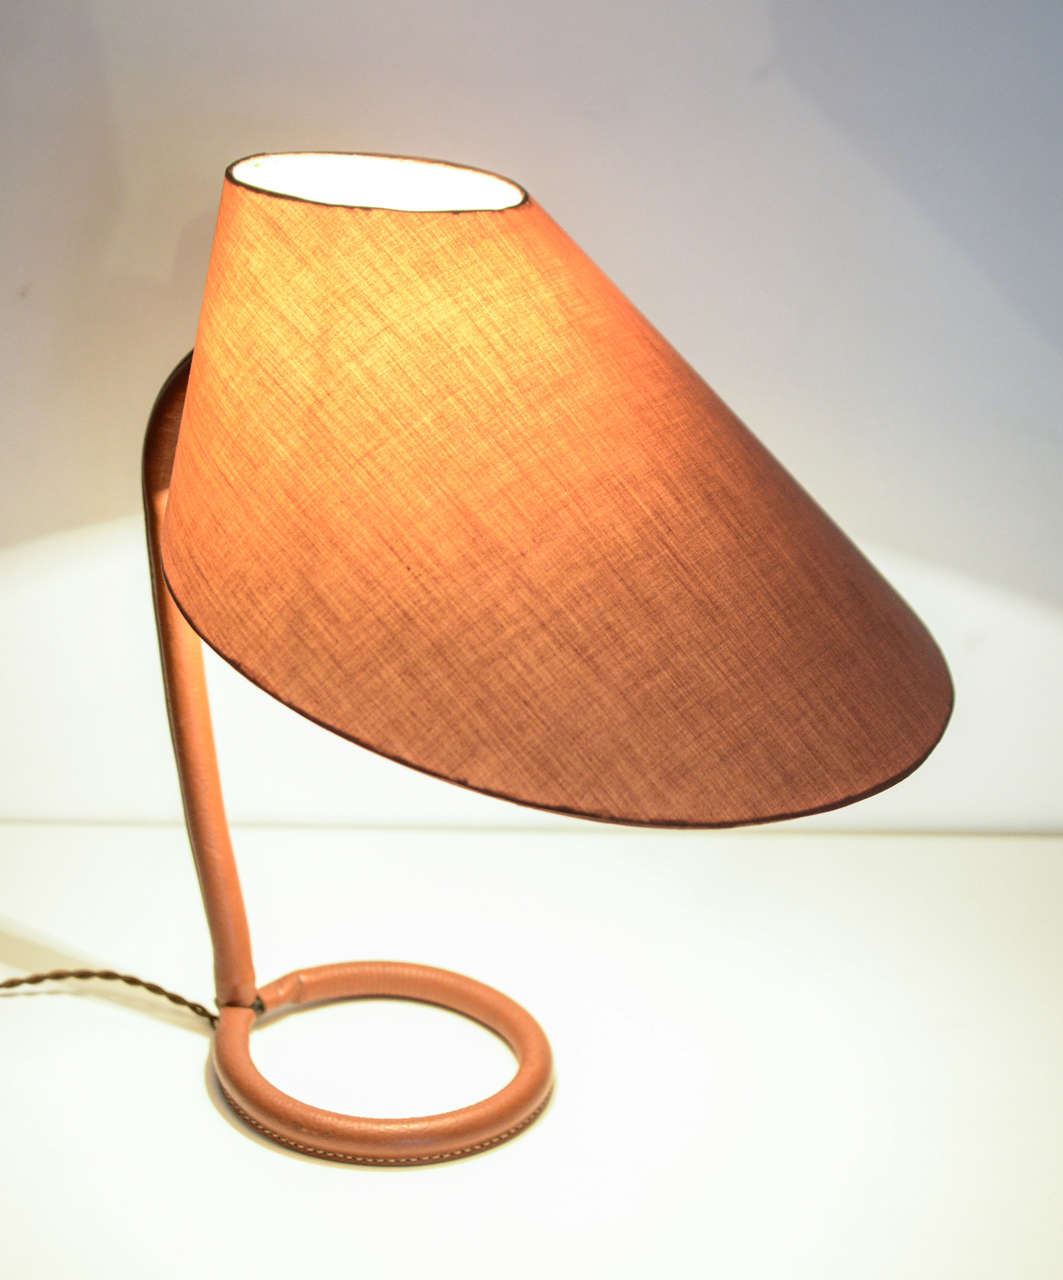 Original table lamp by Jacques Adnet, 1950's
covered with Brown leather 